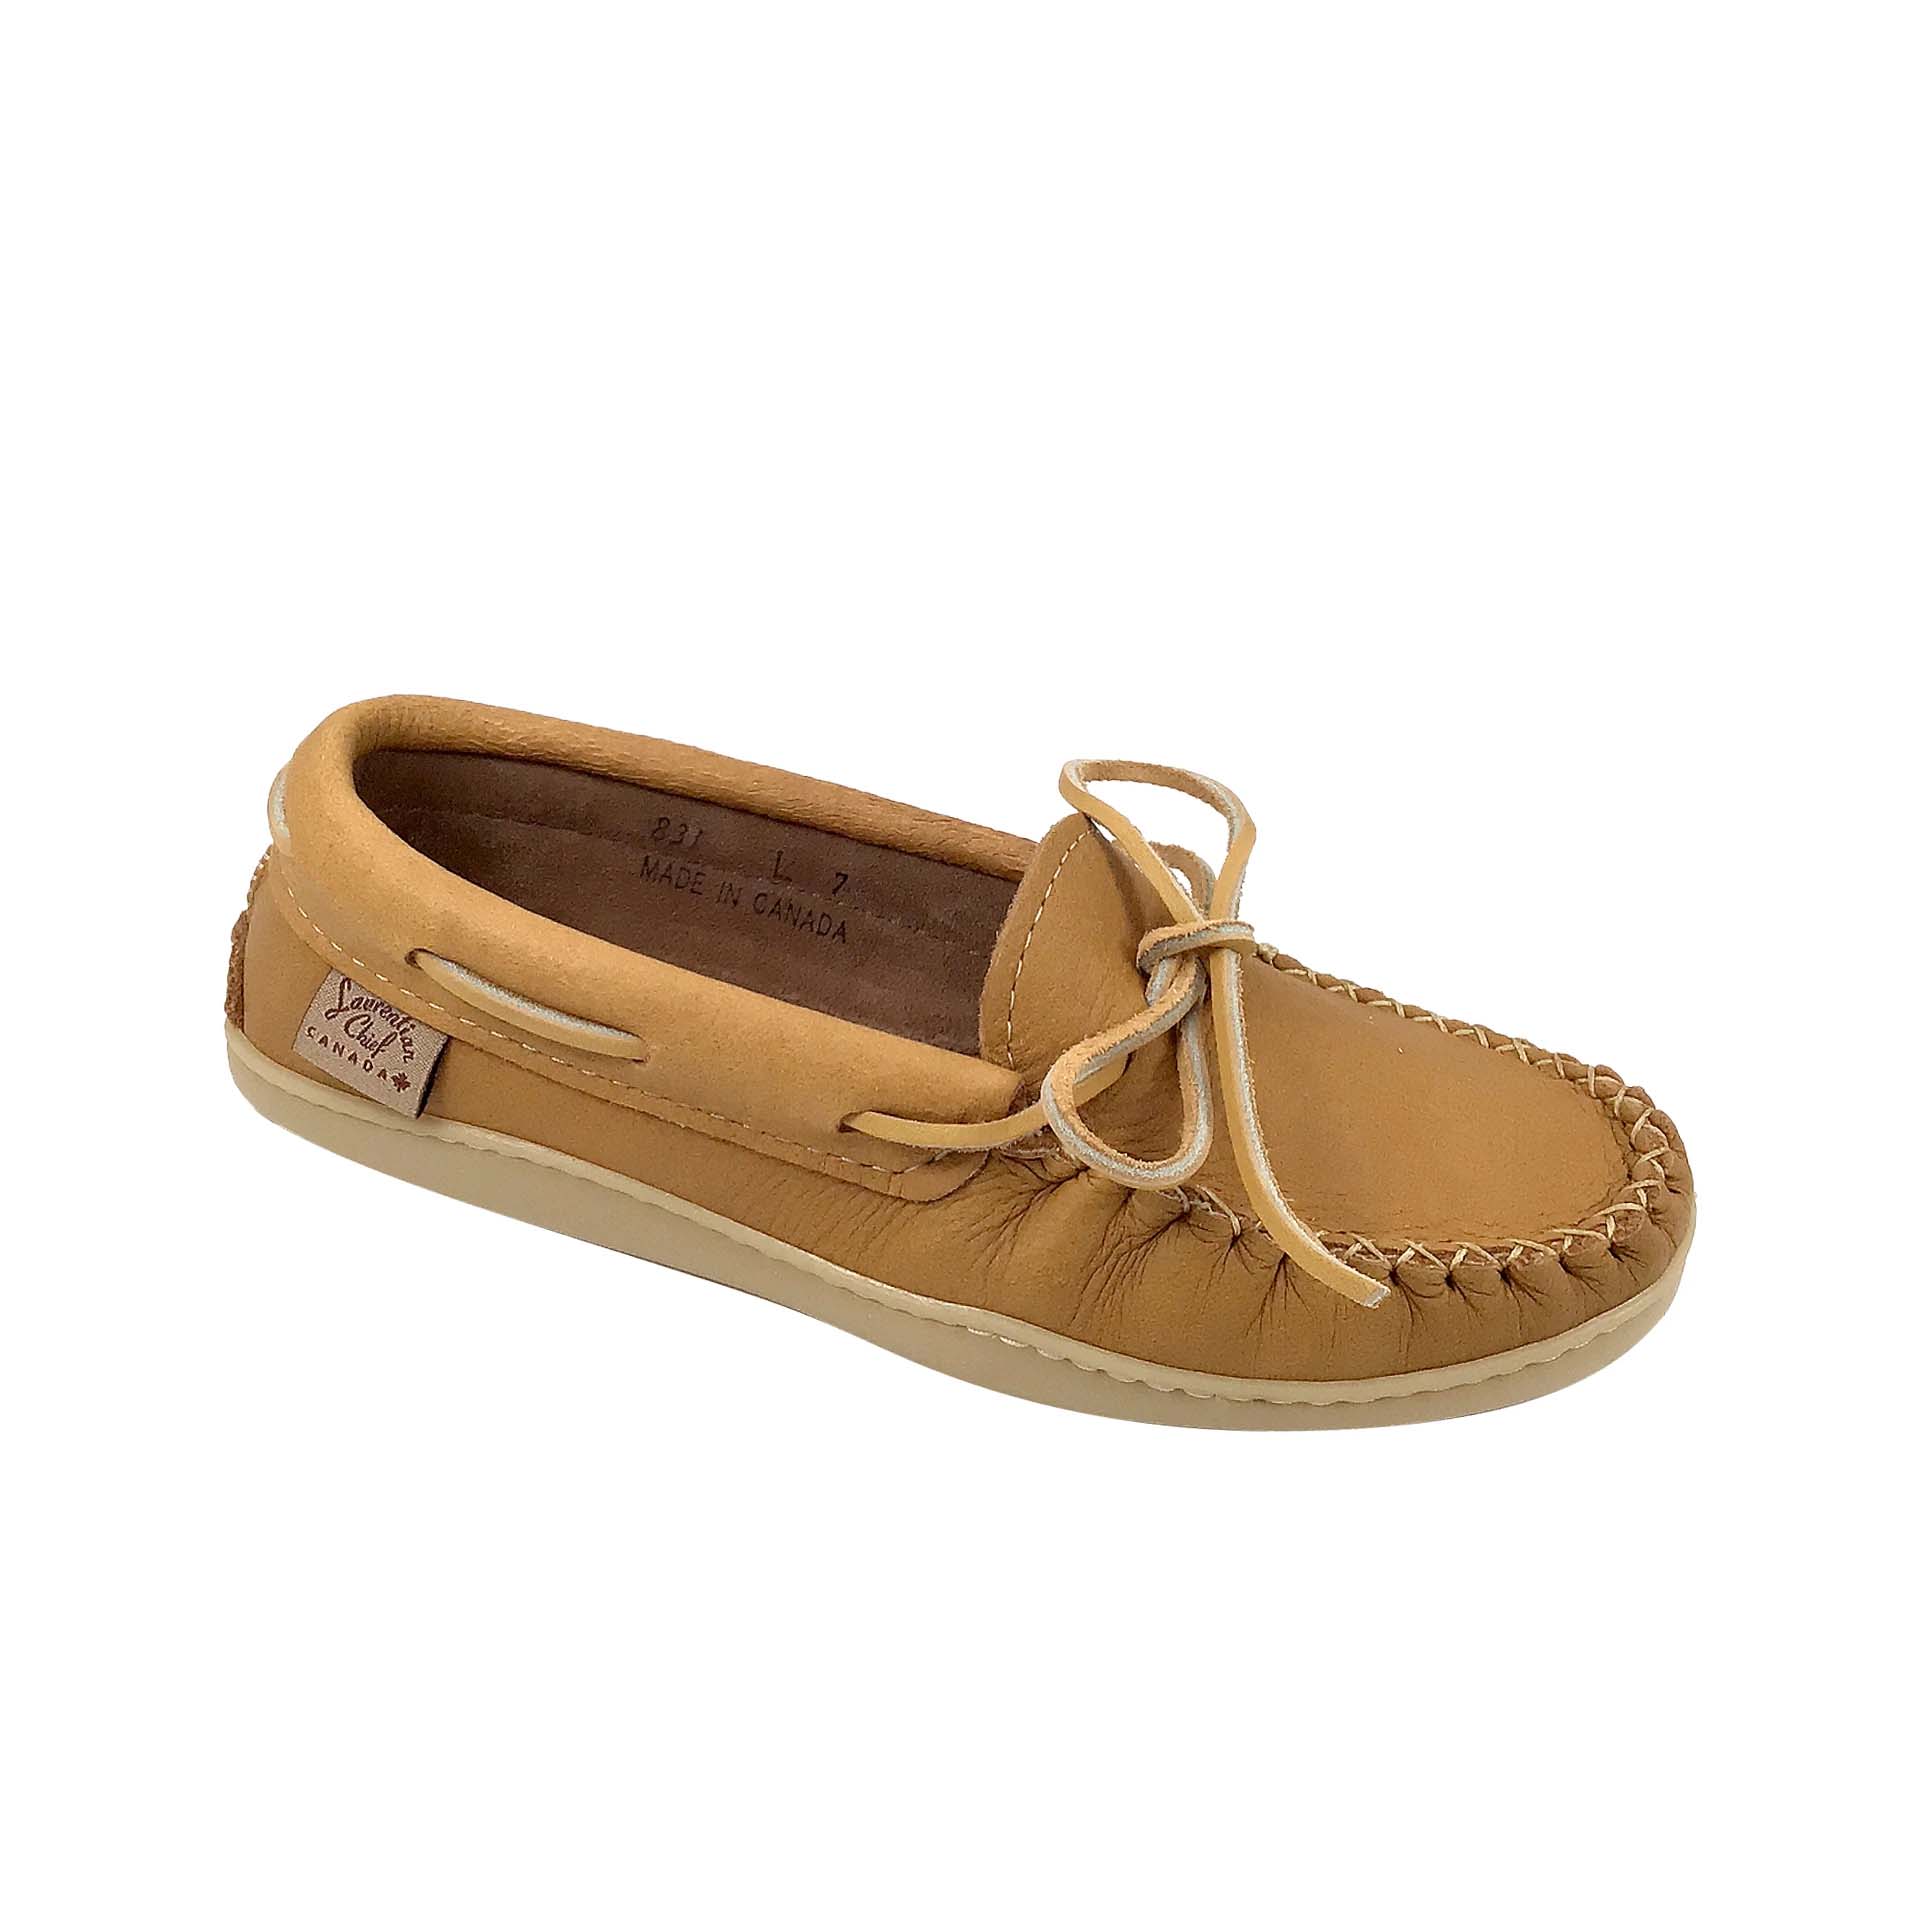 Women's Earthing Moccasin Shoes with Copper Rivet Rubber Sole